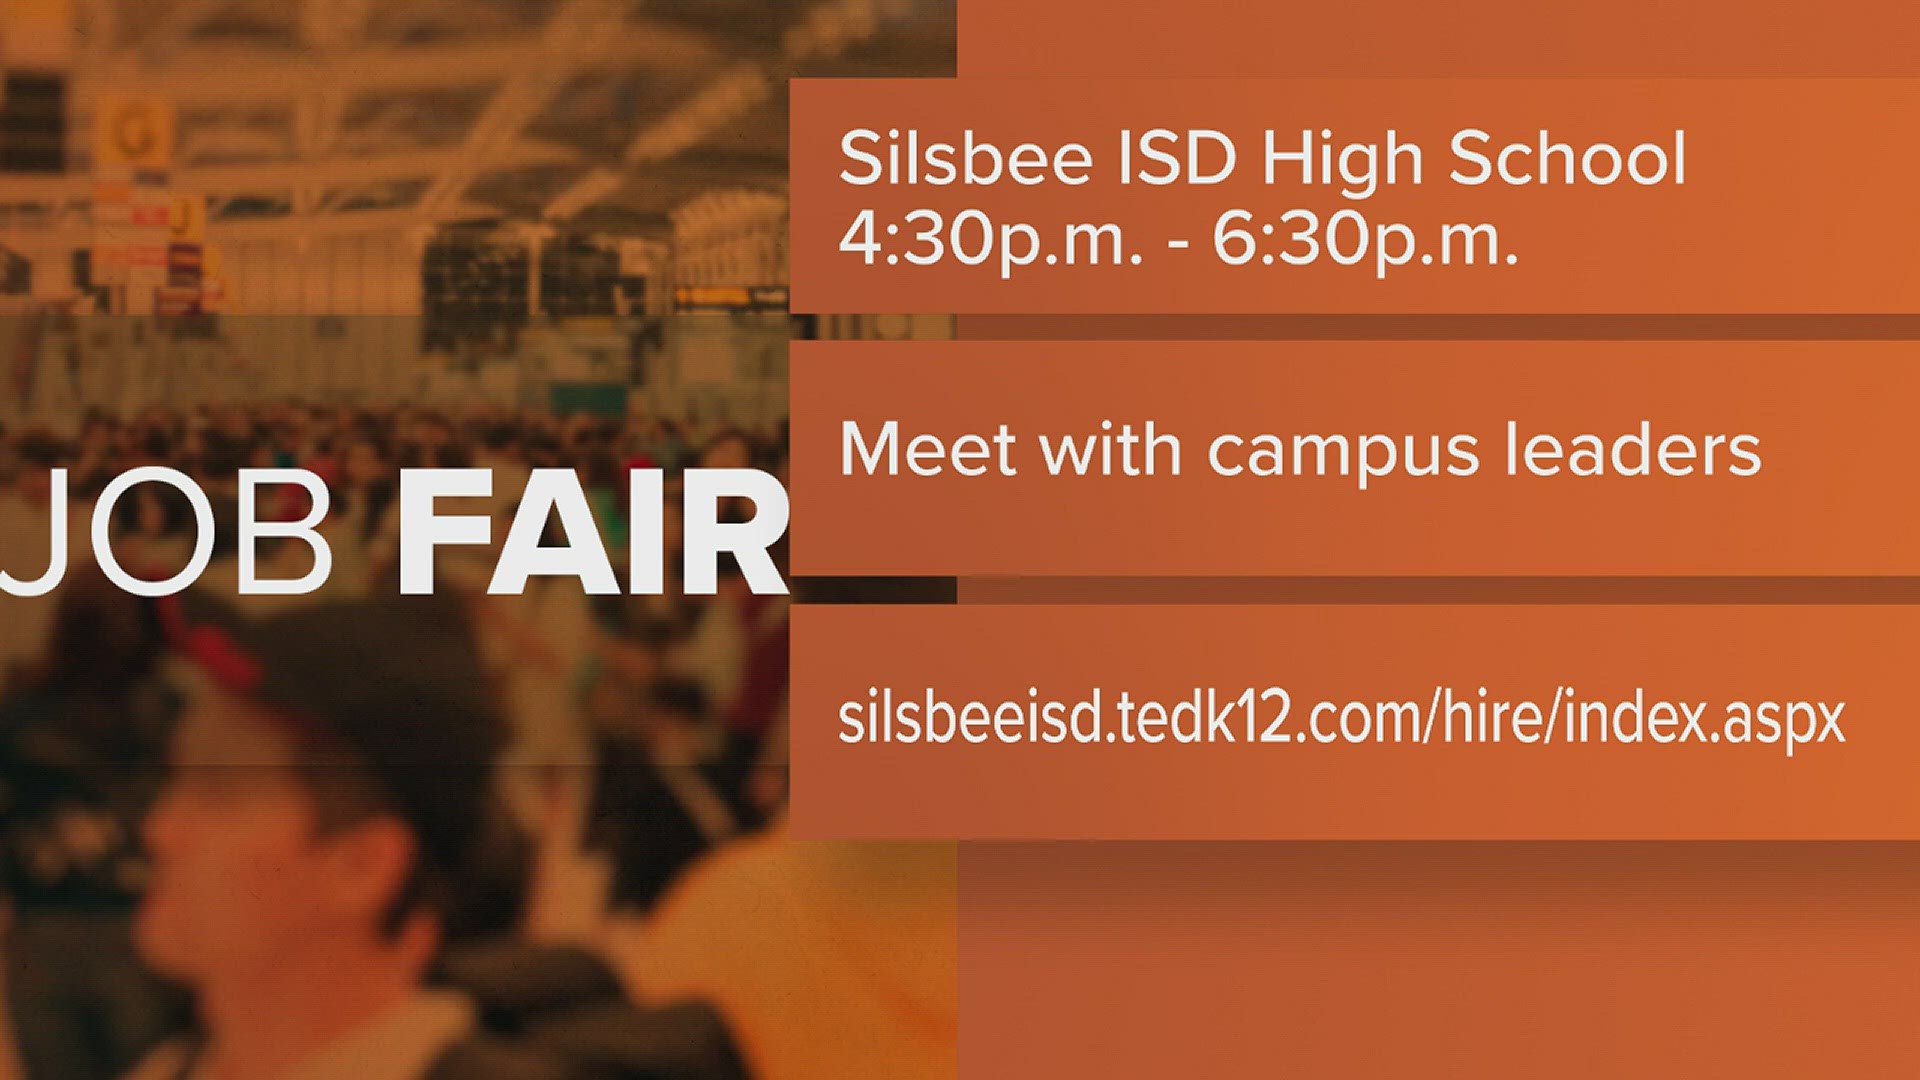 The job fair will be at  Silsbee High School from 4:30 p.m. to 6 p.m. Tuesday afternoon.